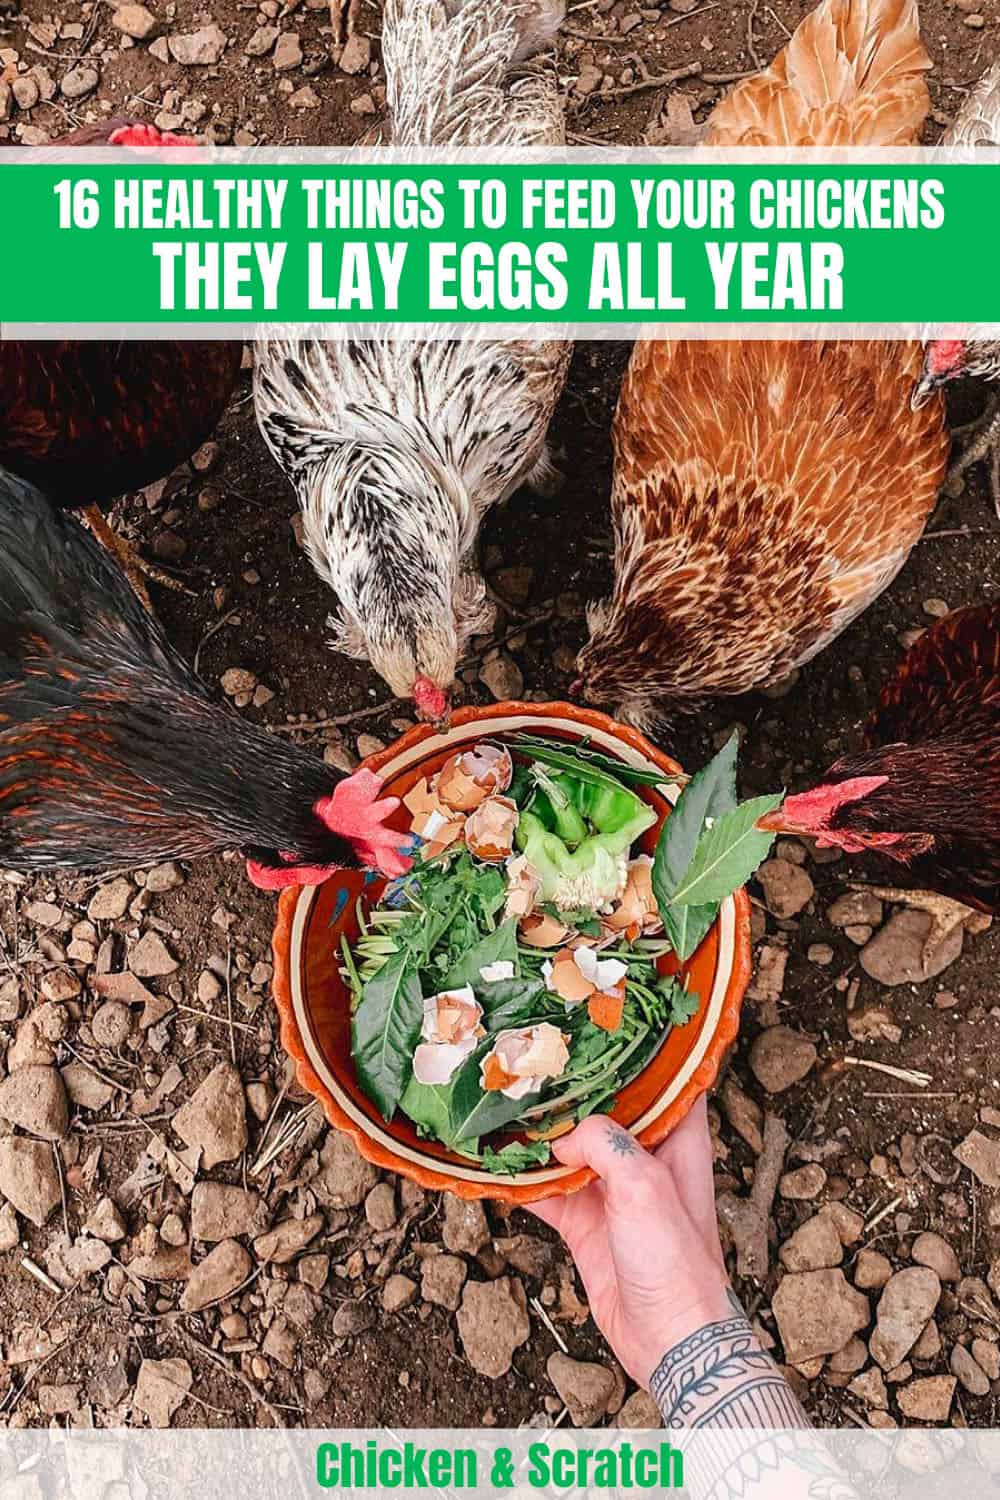 16 Healthy Things to Feed Your Chickens - They Lay Eggs All Year